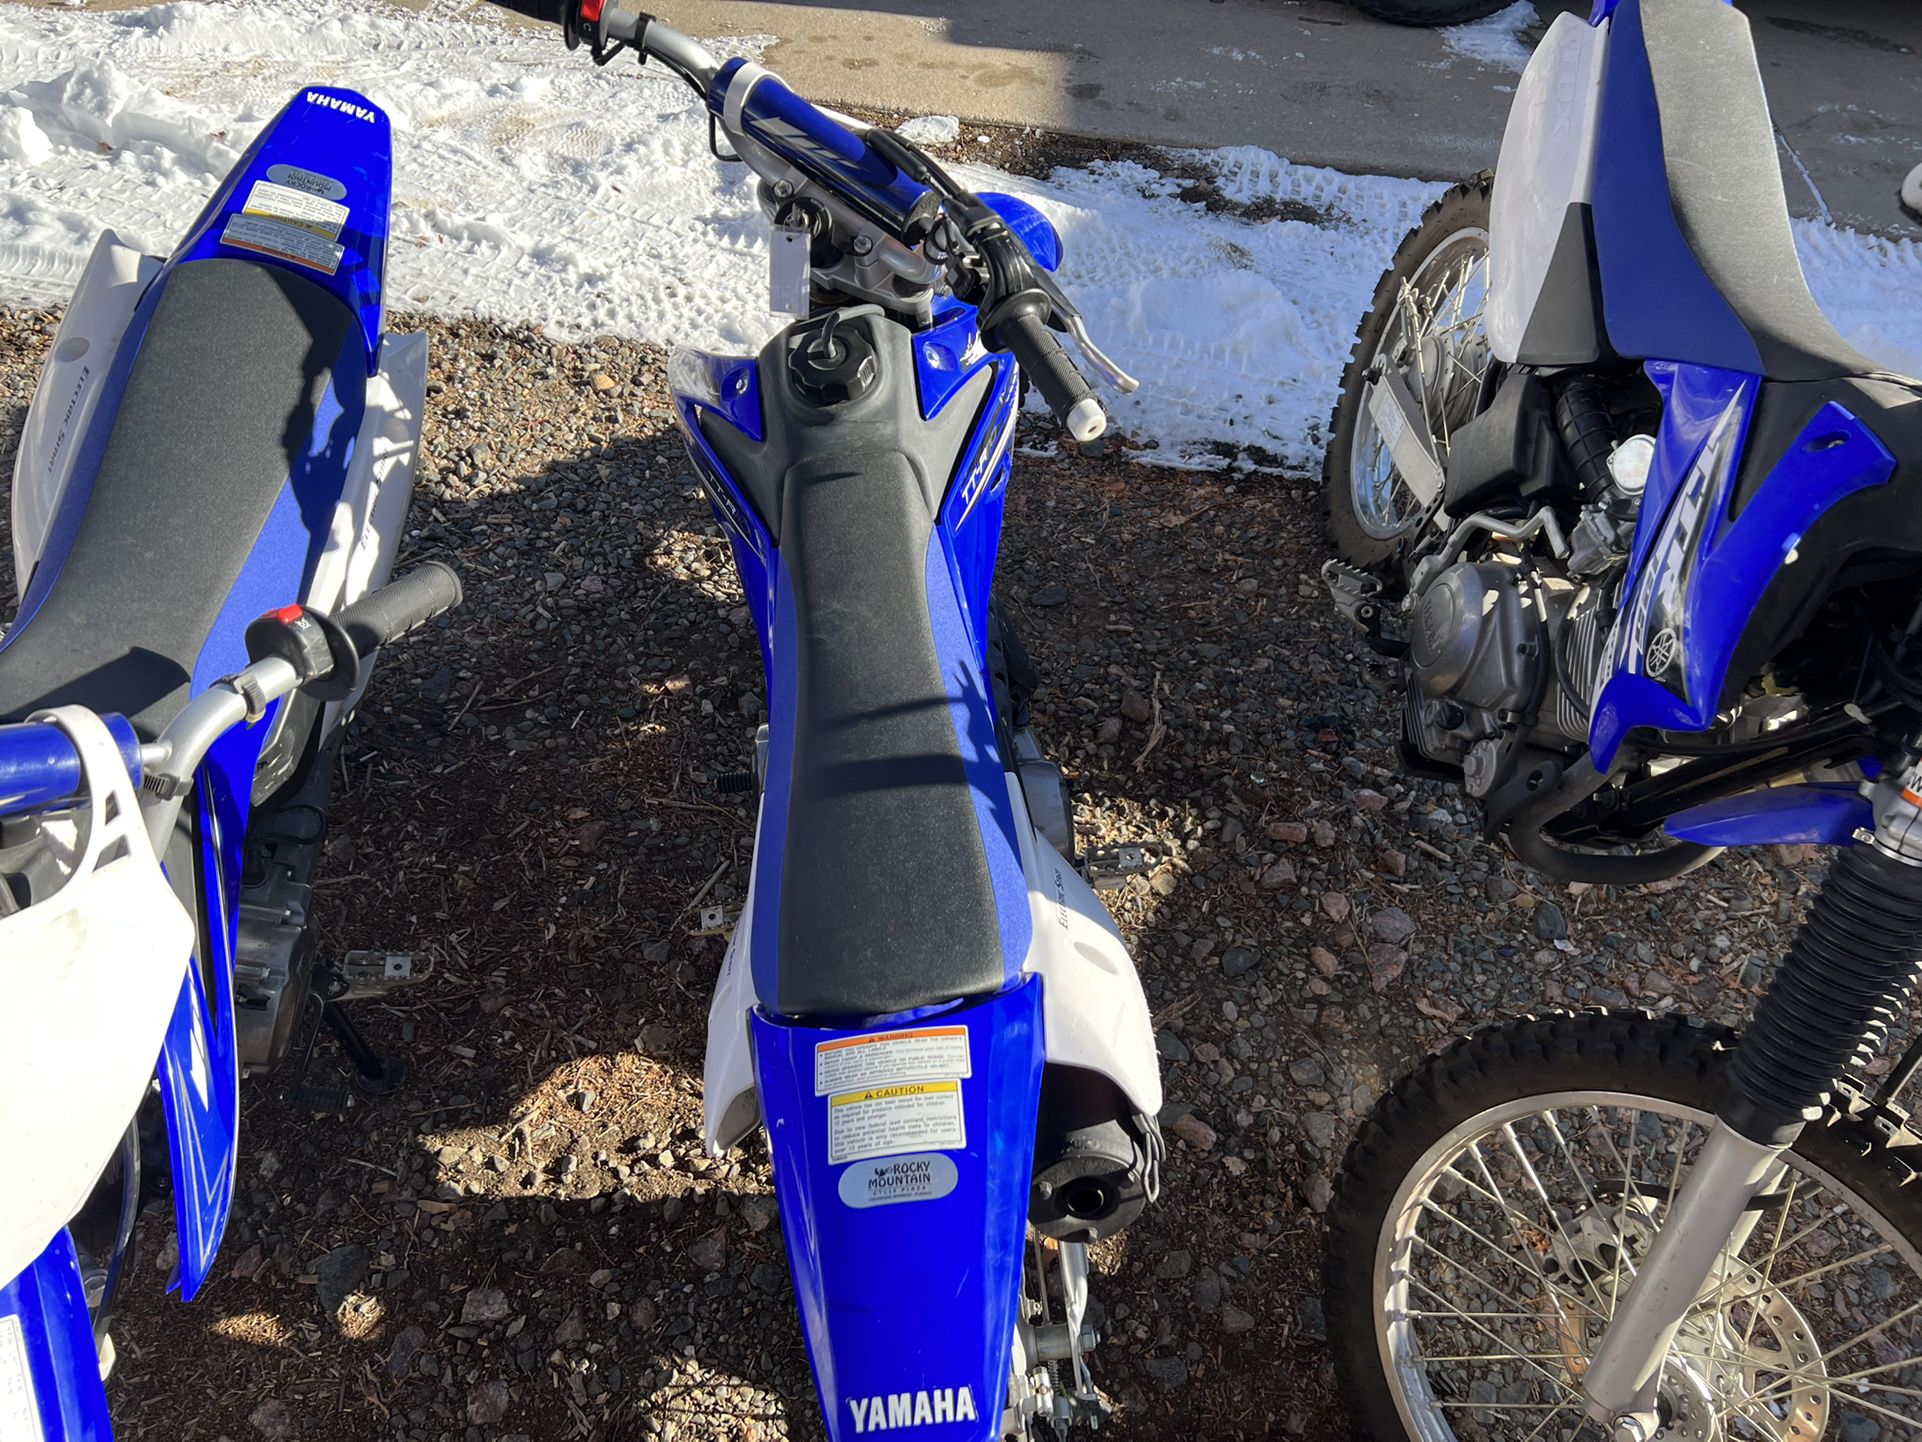 2015 Yamaha Ttr125le And Two 2012 Ttr 110e